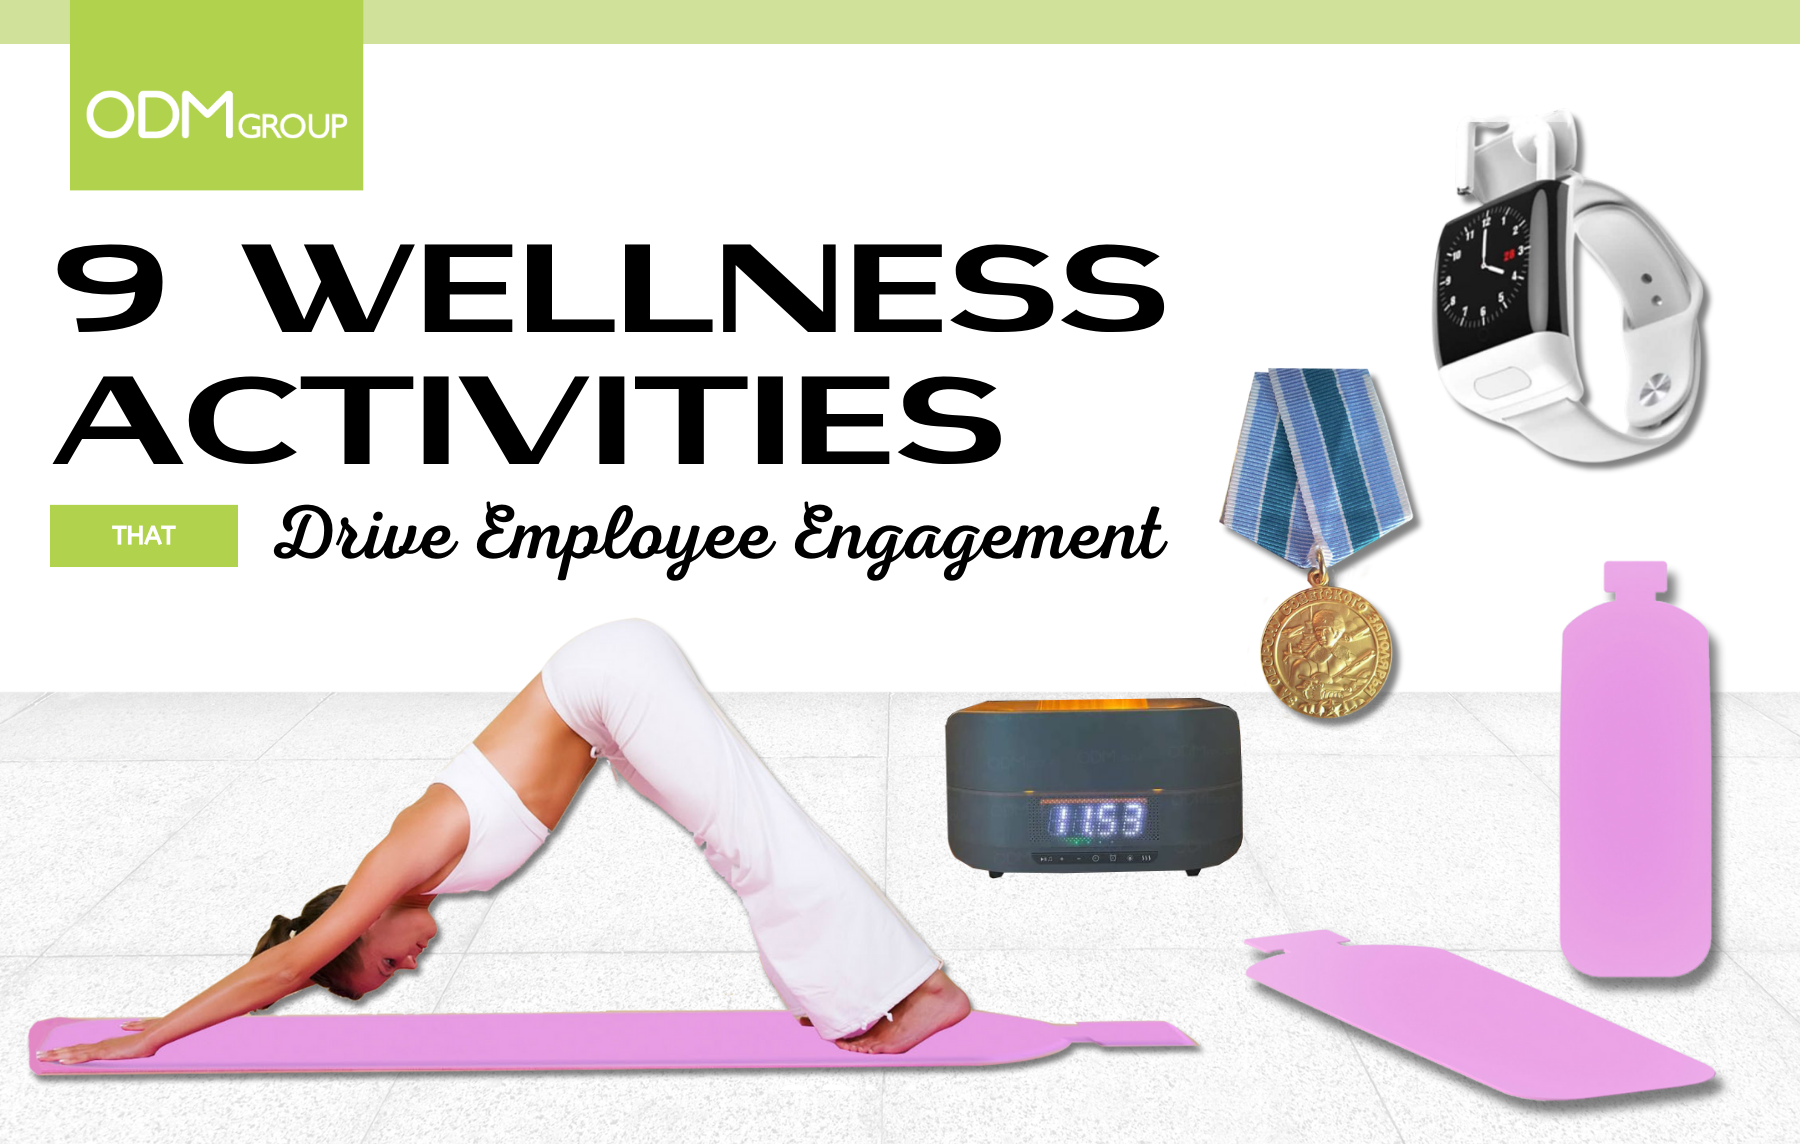 Gifts for various wellness activities.